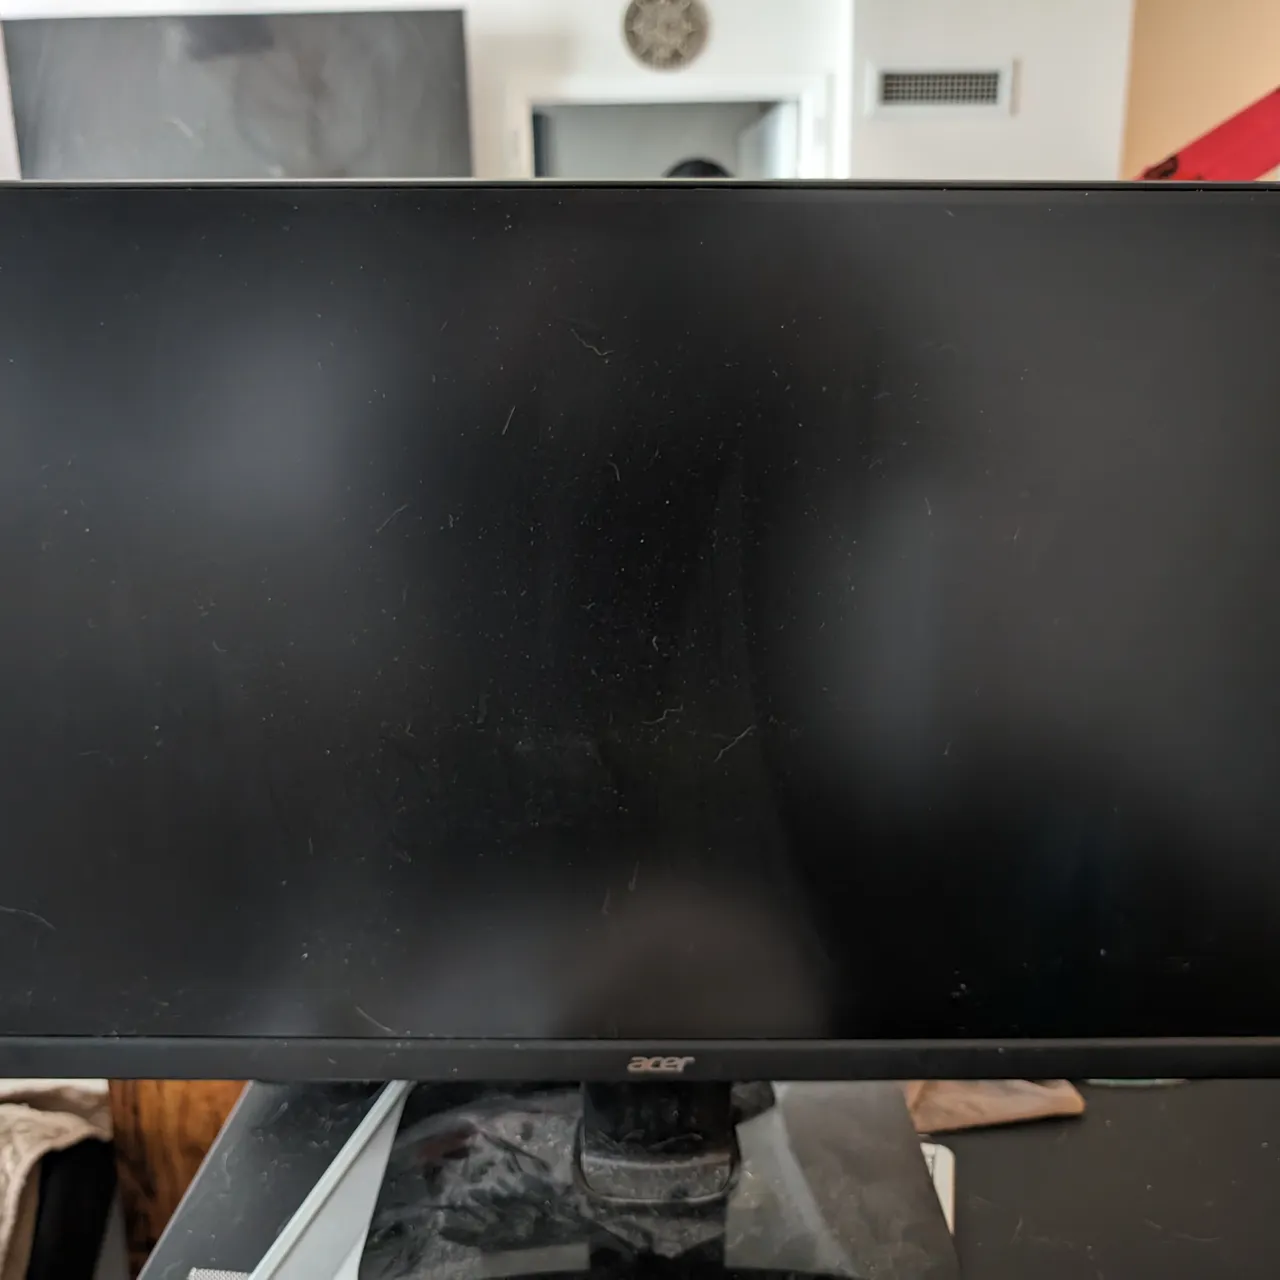 Acer 27inch Monitor photo 1